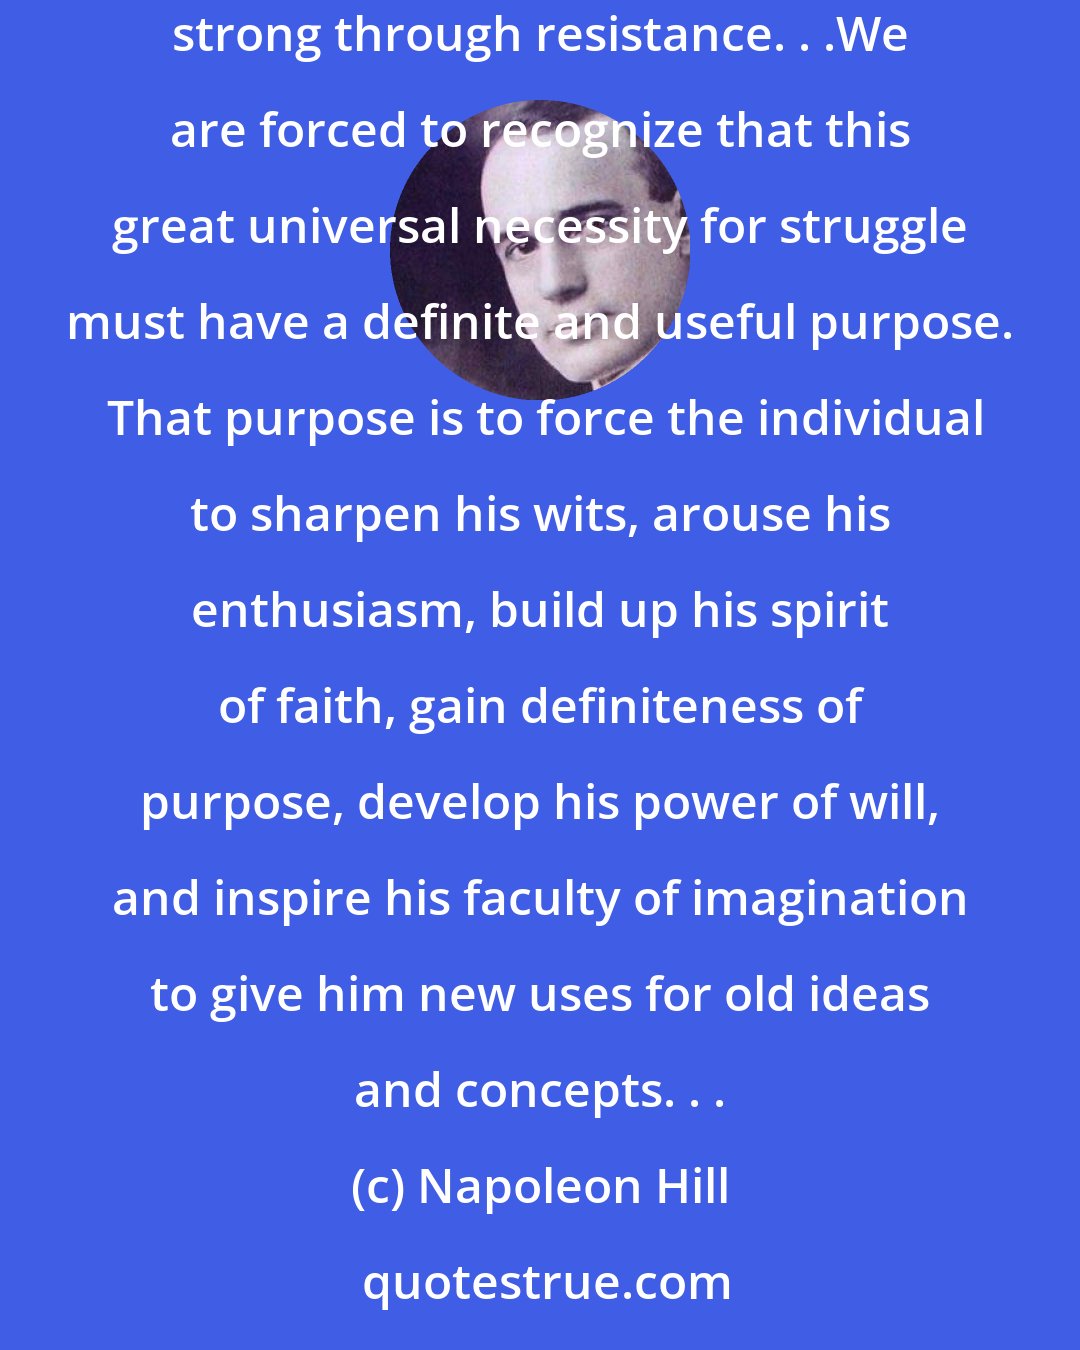 Napoleon Hill: The necessity for struggle is one of the clever devices through which nature forces individuals to expand, develop, progress, and become strong through resistance. . .We are forced to recognize that this great universal necessity for struggle must have a definite and useful purpose.  That purpose is to force the individual to sharpen his wits, arouse his enthusiasm, build up his spirit of faith, gain definiteness of purpose, develop his power of will, and inspire his faculty of imagination to give him new uses for old ideas and concepts. . .